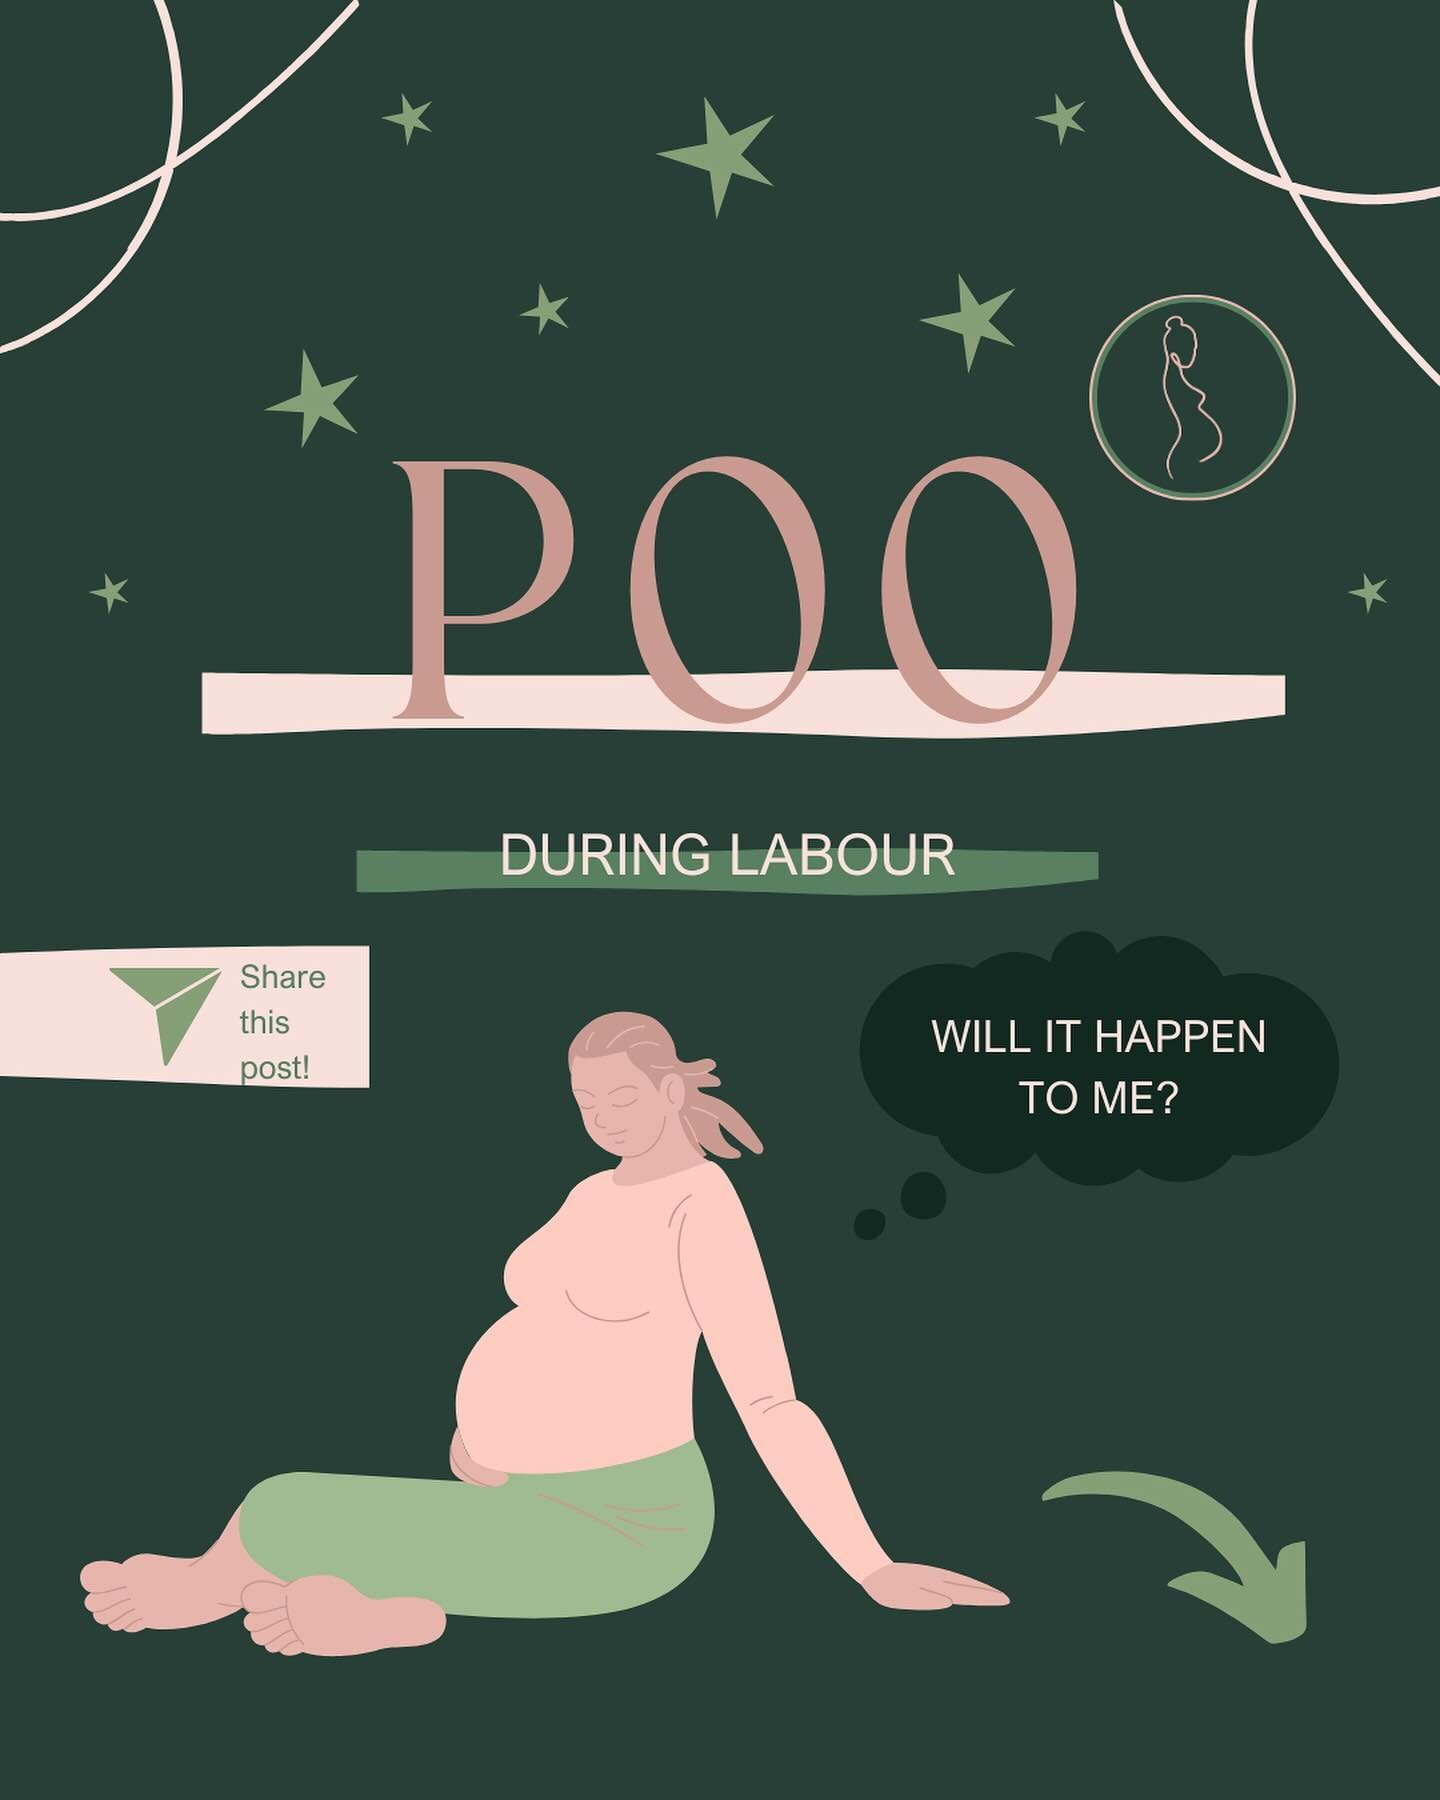 💩 Let&rsquo;s kick off this week with some real talk about a topic that&rsquo;s often swept under the rug: Poo during labor! 💩

It&rsquo;s totally normal to feel a bit apprehensive about this aspect of childbirth, but here&rsquo;s the scoop: if you